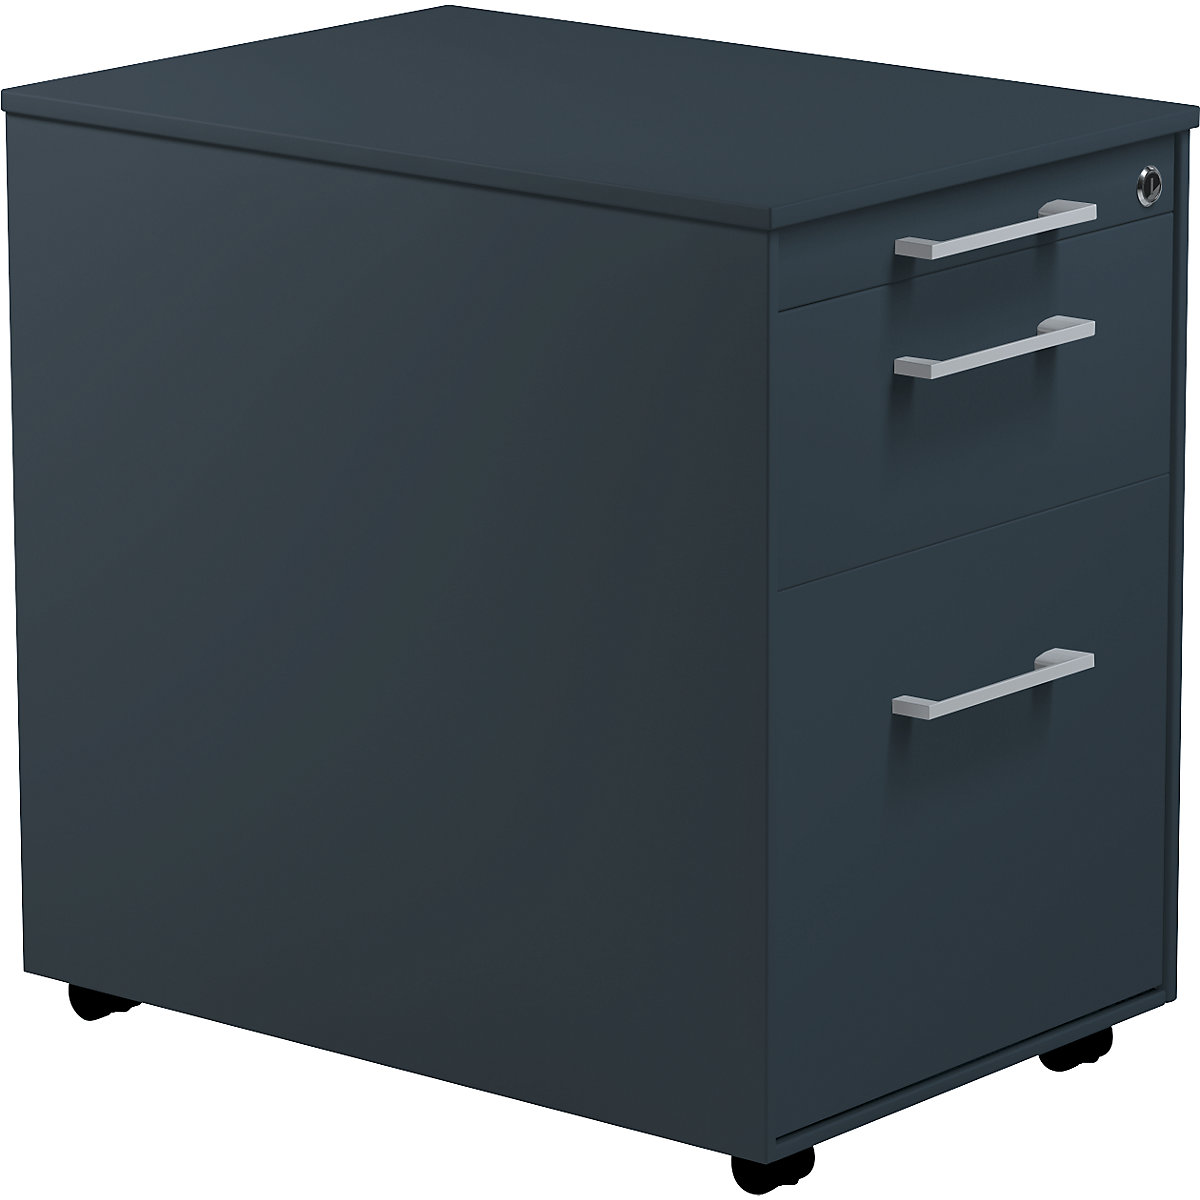 Mobile pedestal on castors – mauser, HxD 570 x 600 mm, 1 drawer, 1 suspension file drawer, charcoal / charcoal / charcoal-2